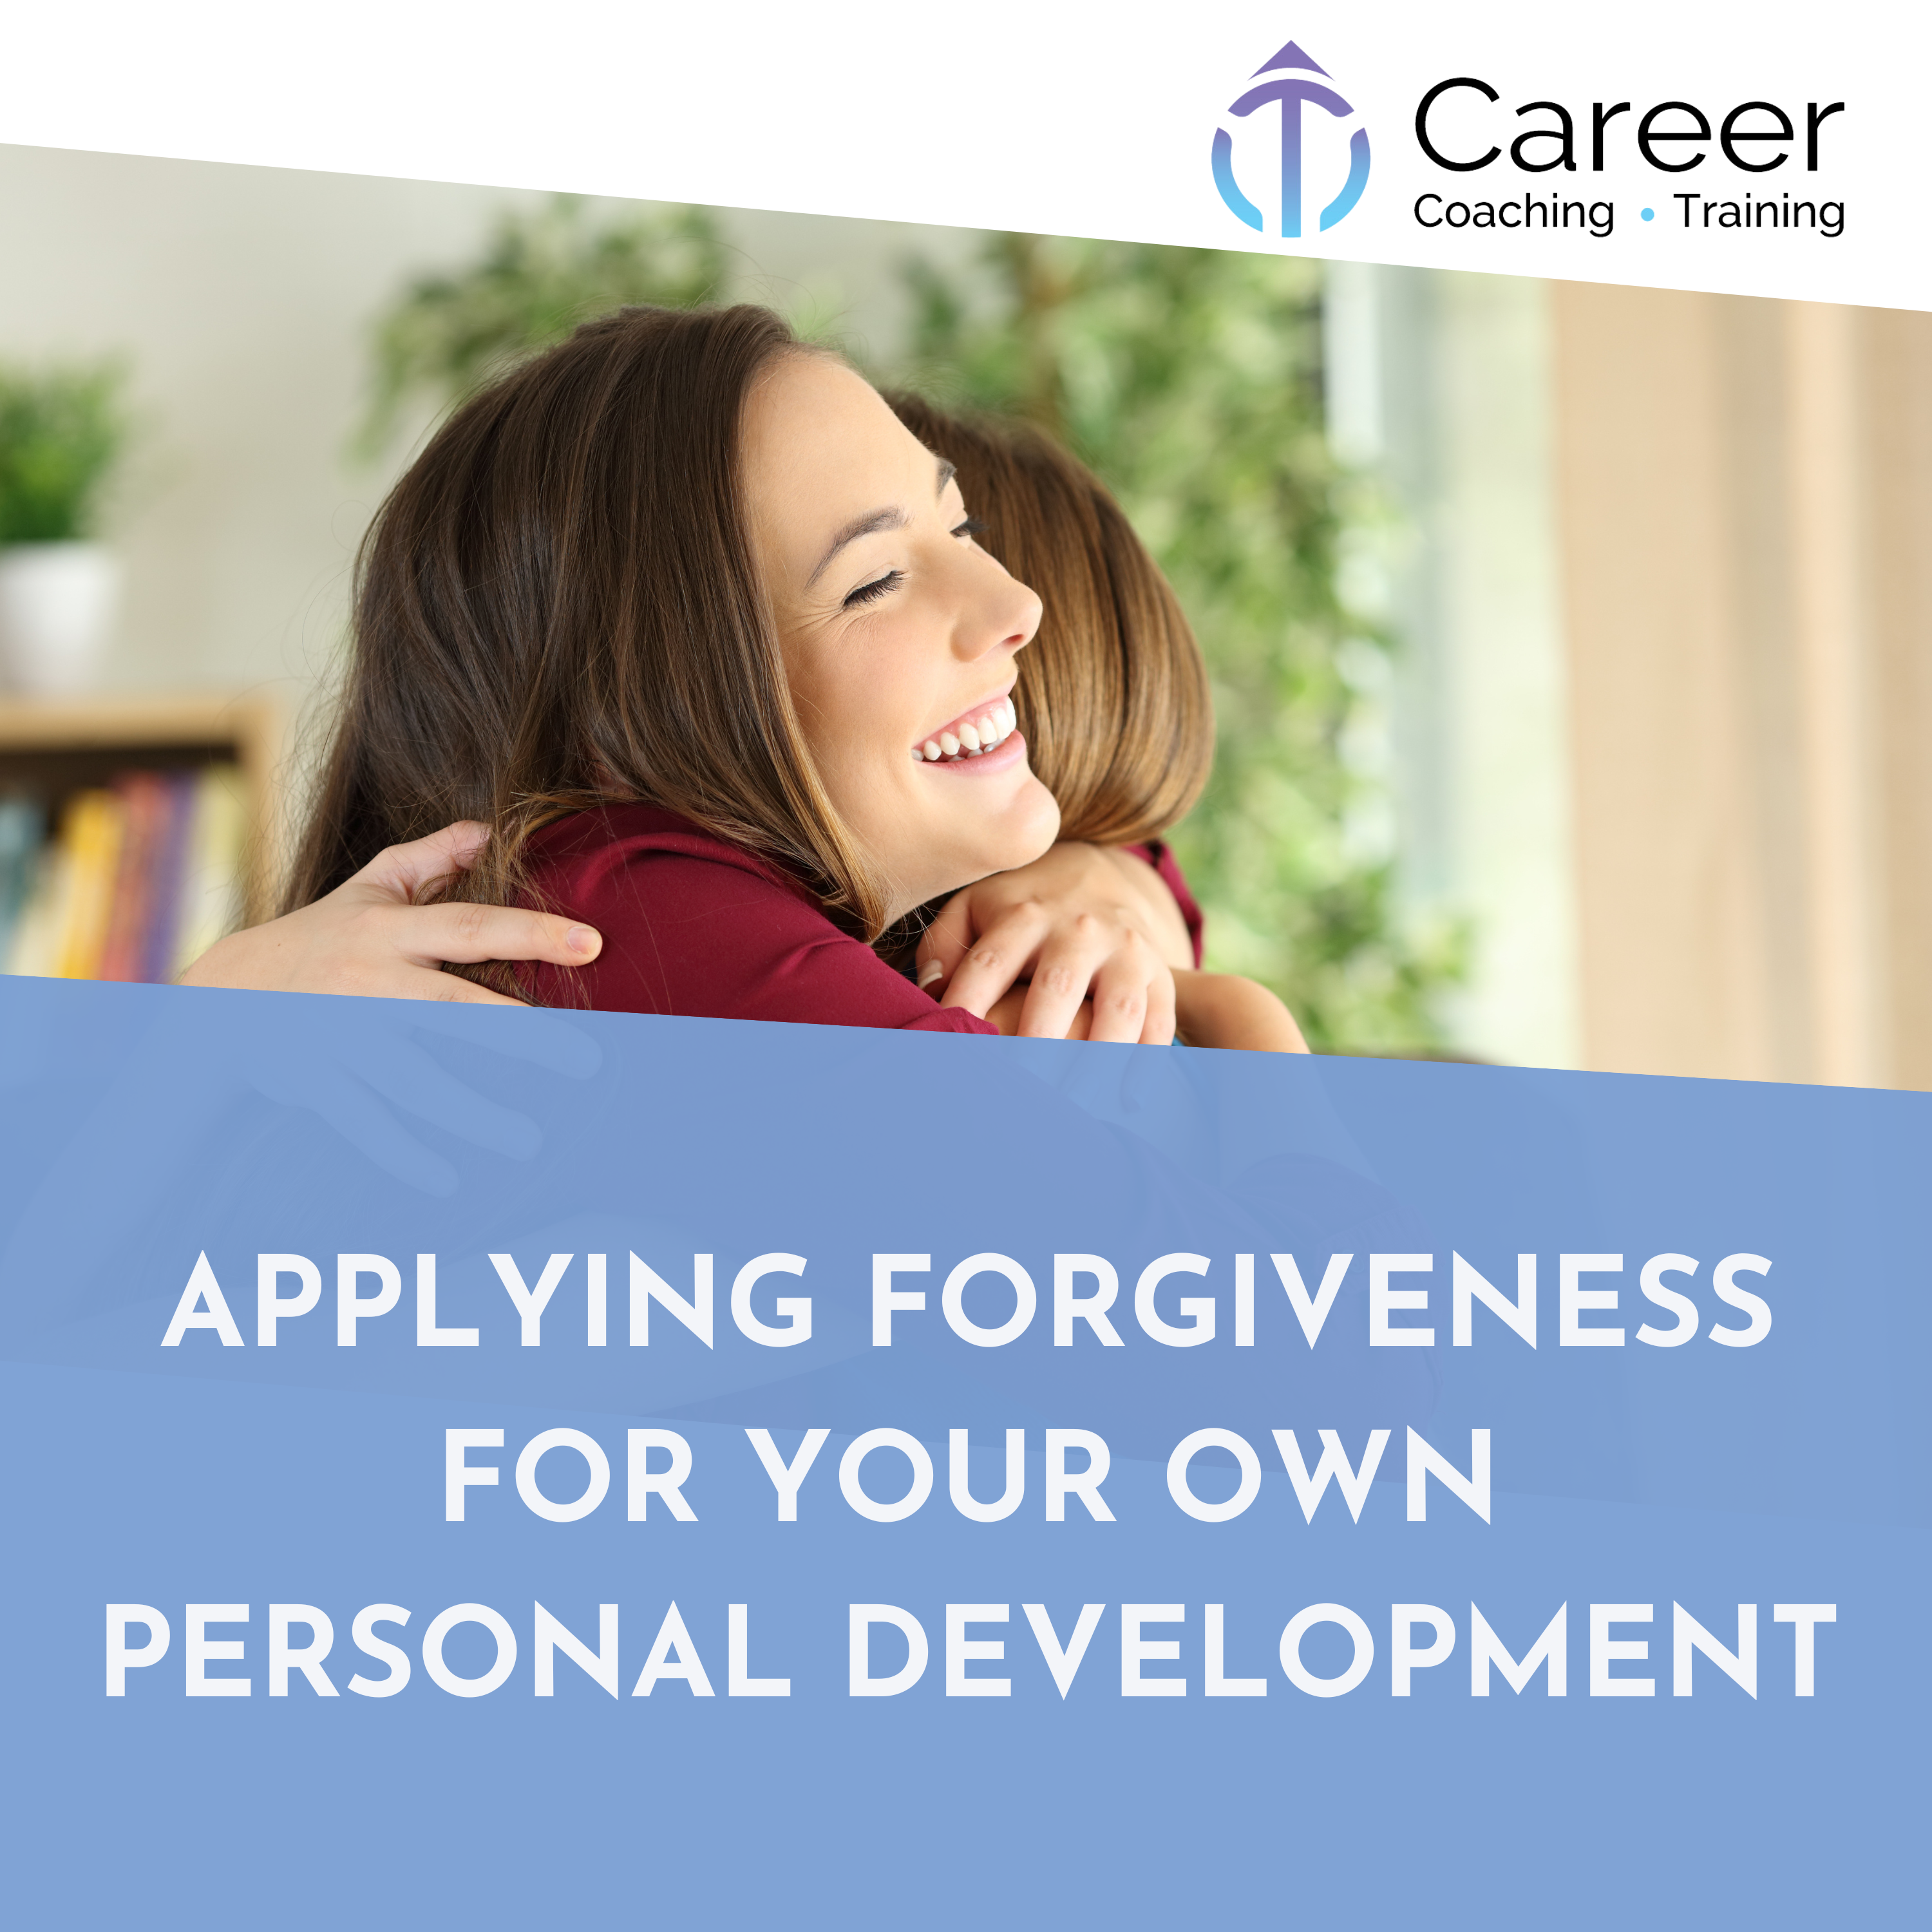 Applying Forgiveness for Your Own Personal Development